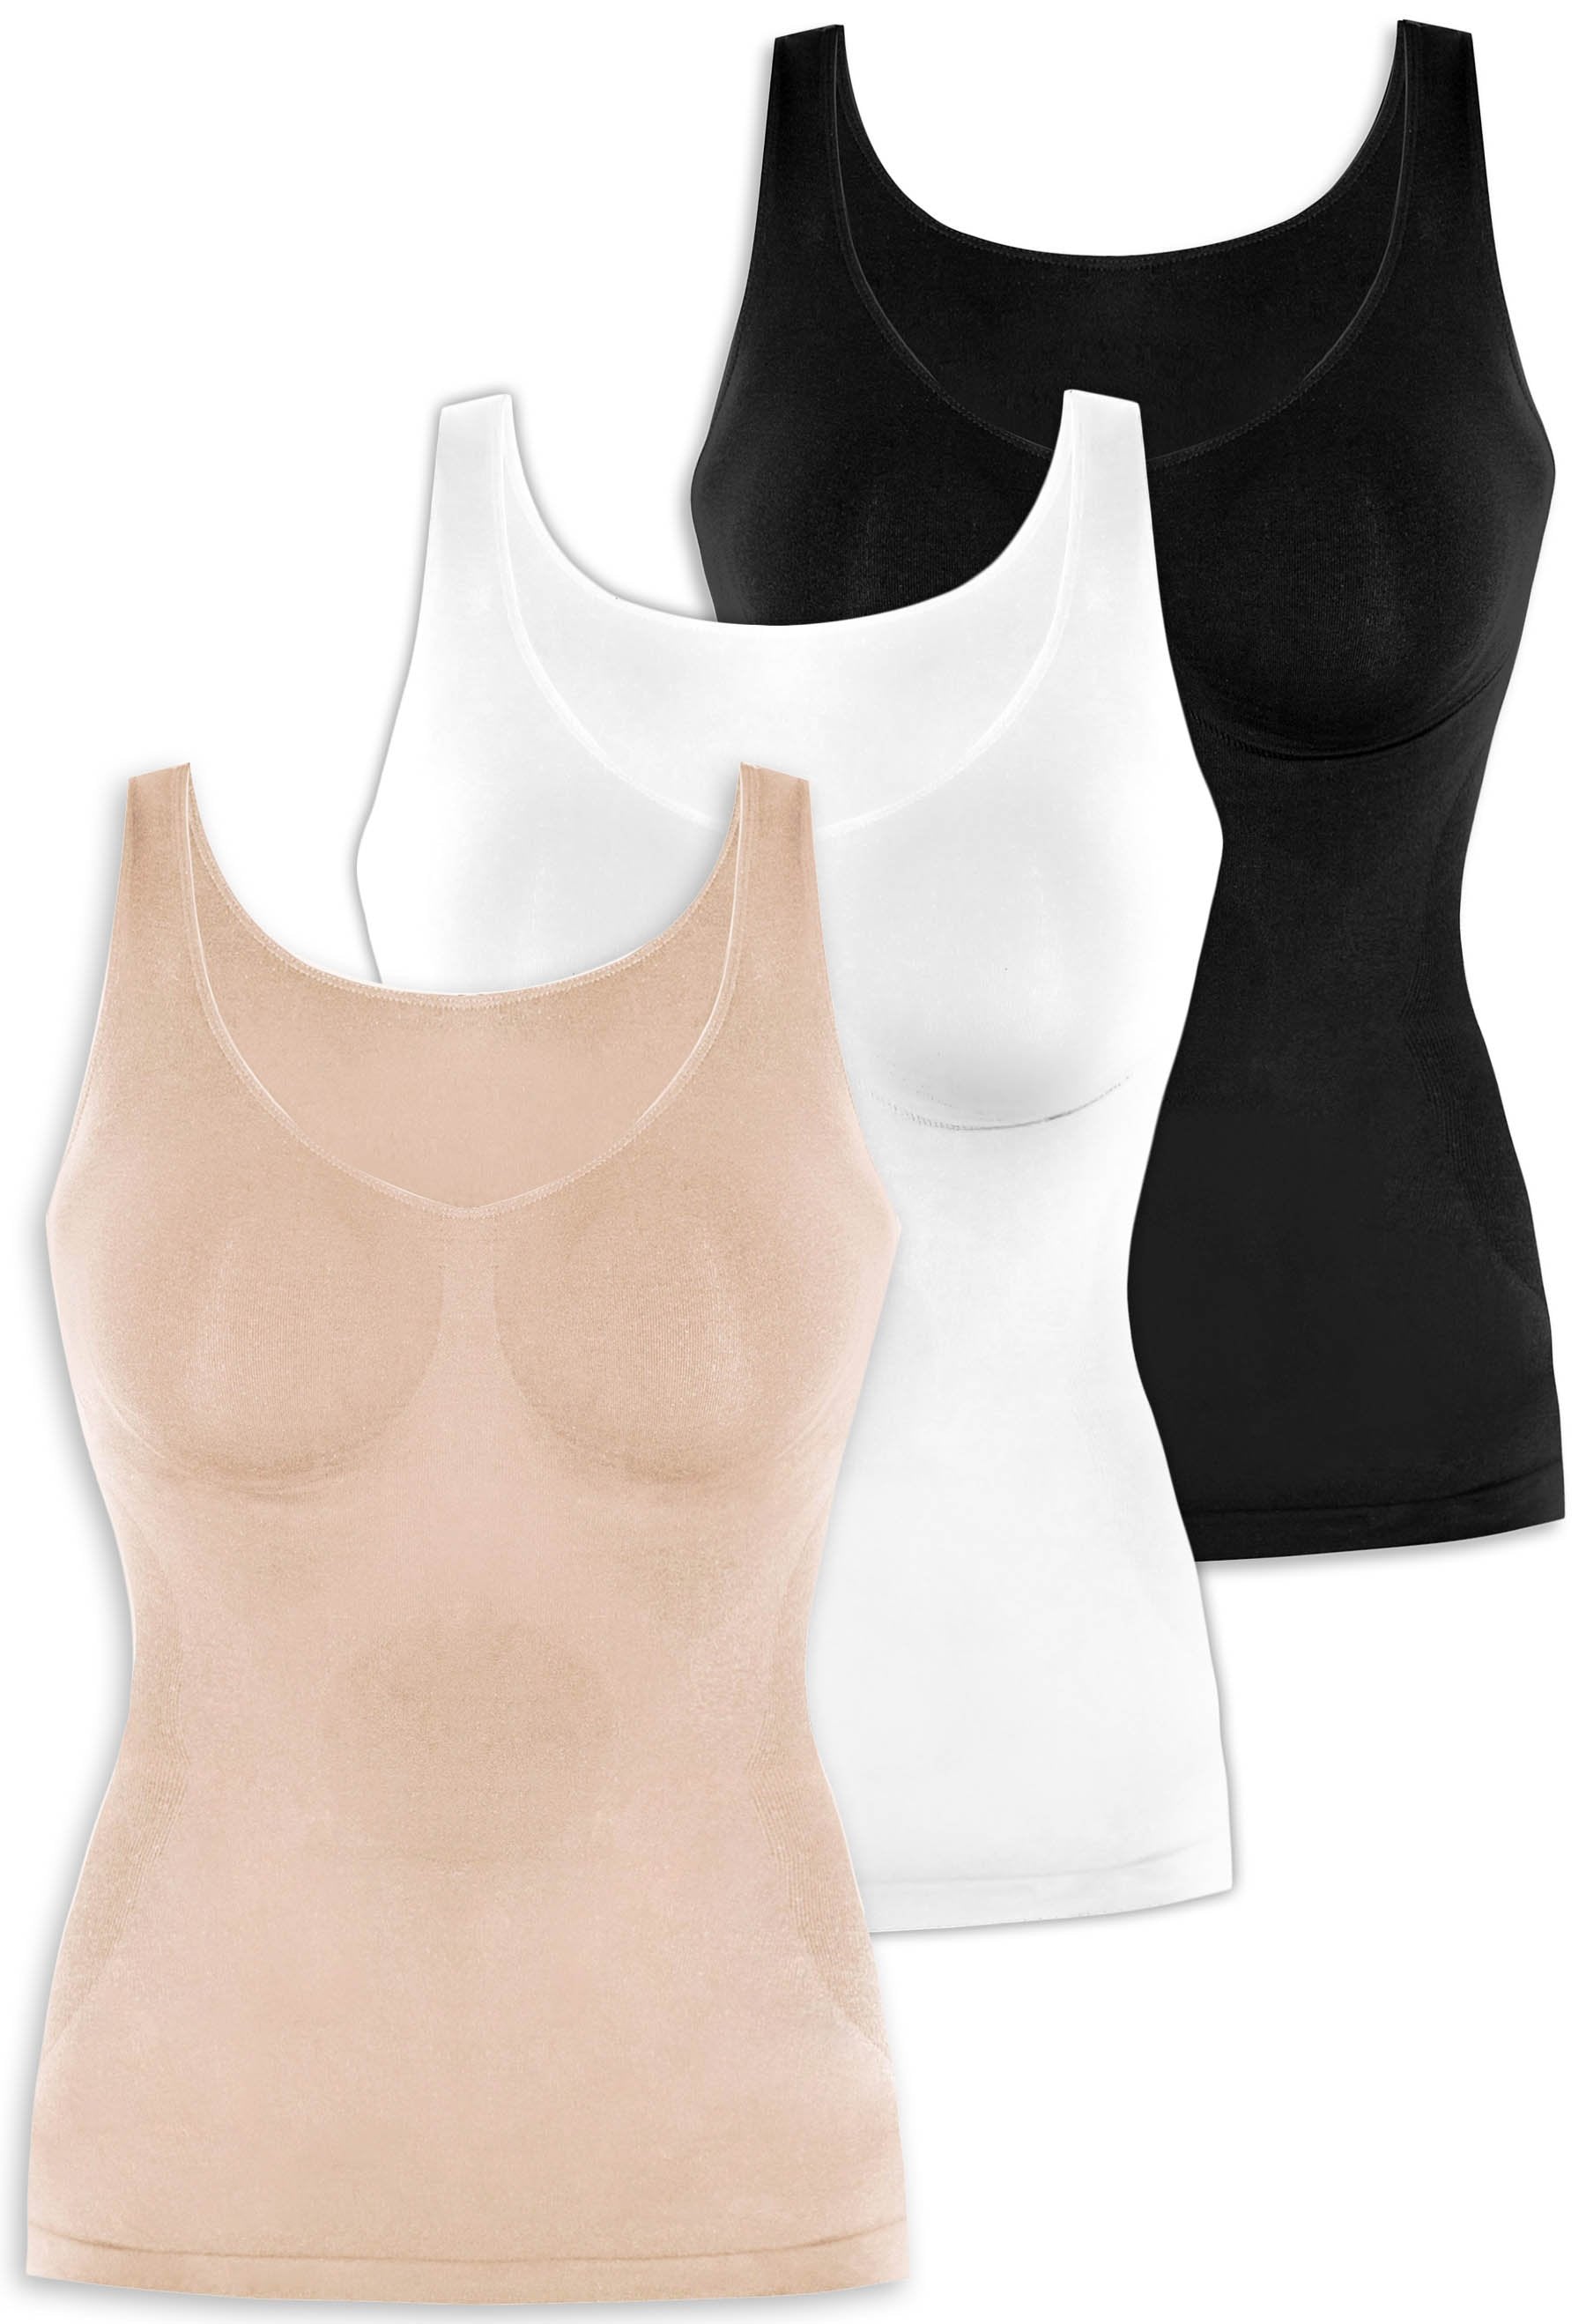 Women's Compression Tank Top 3 Pack Sleeveless Base Layer Top